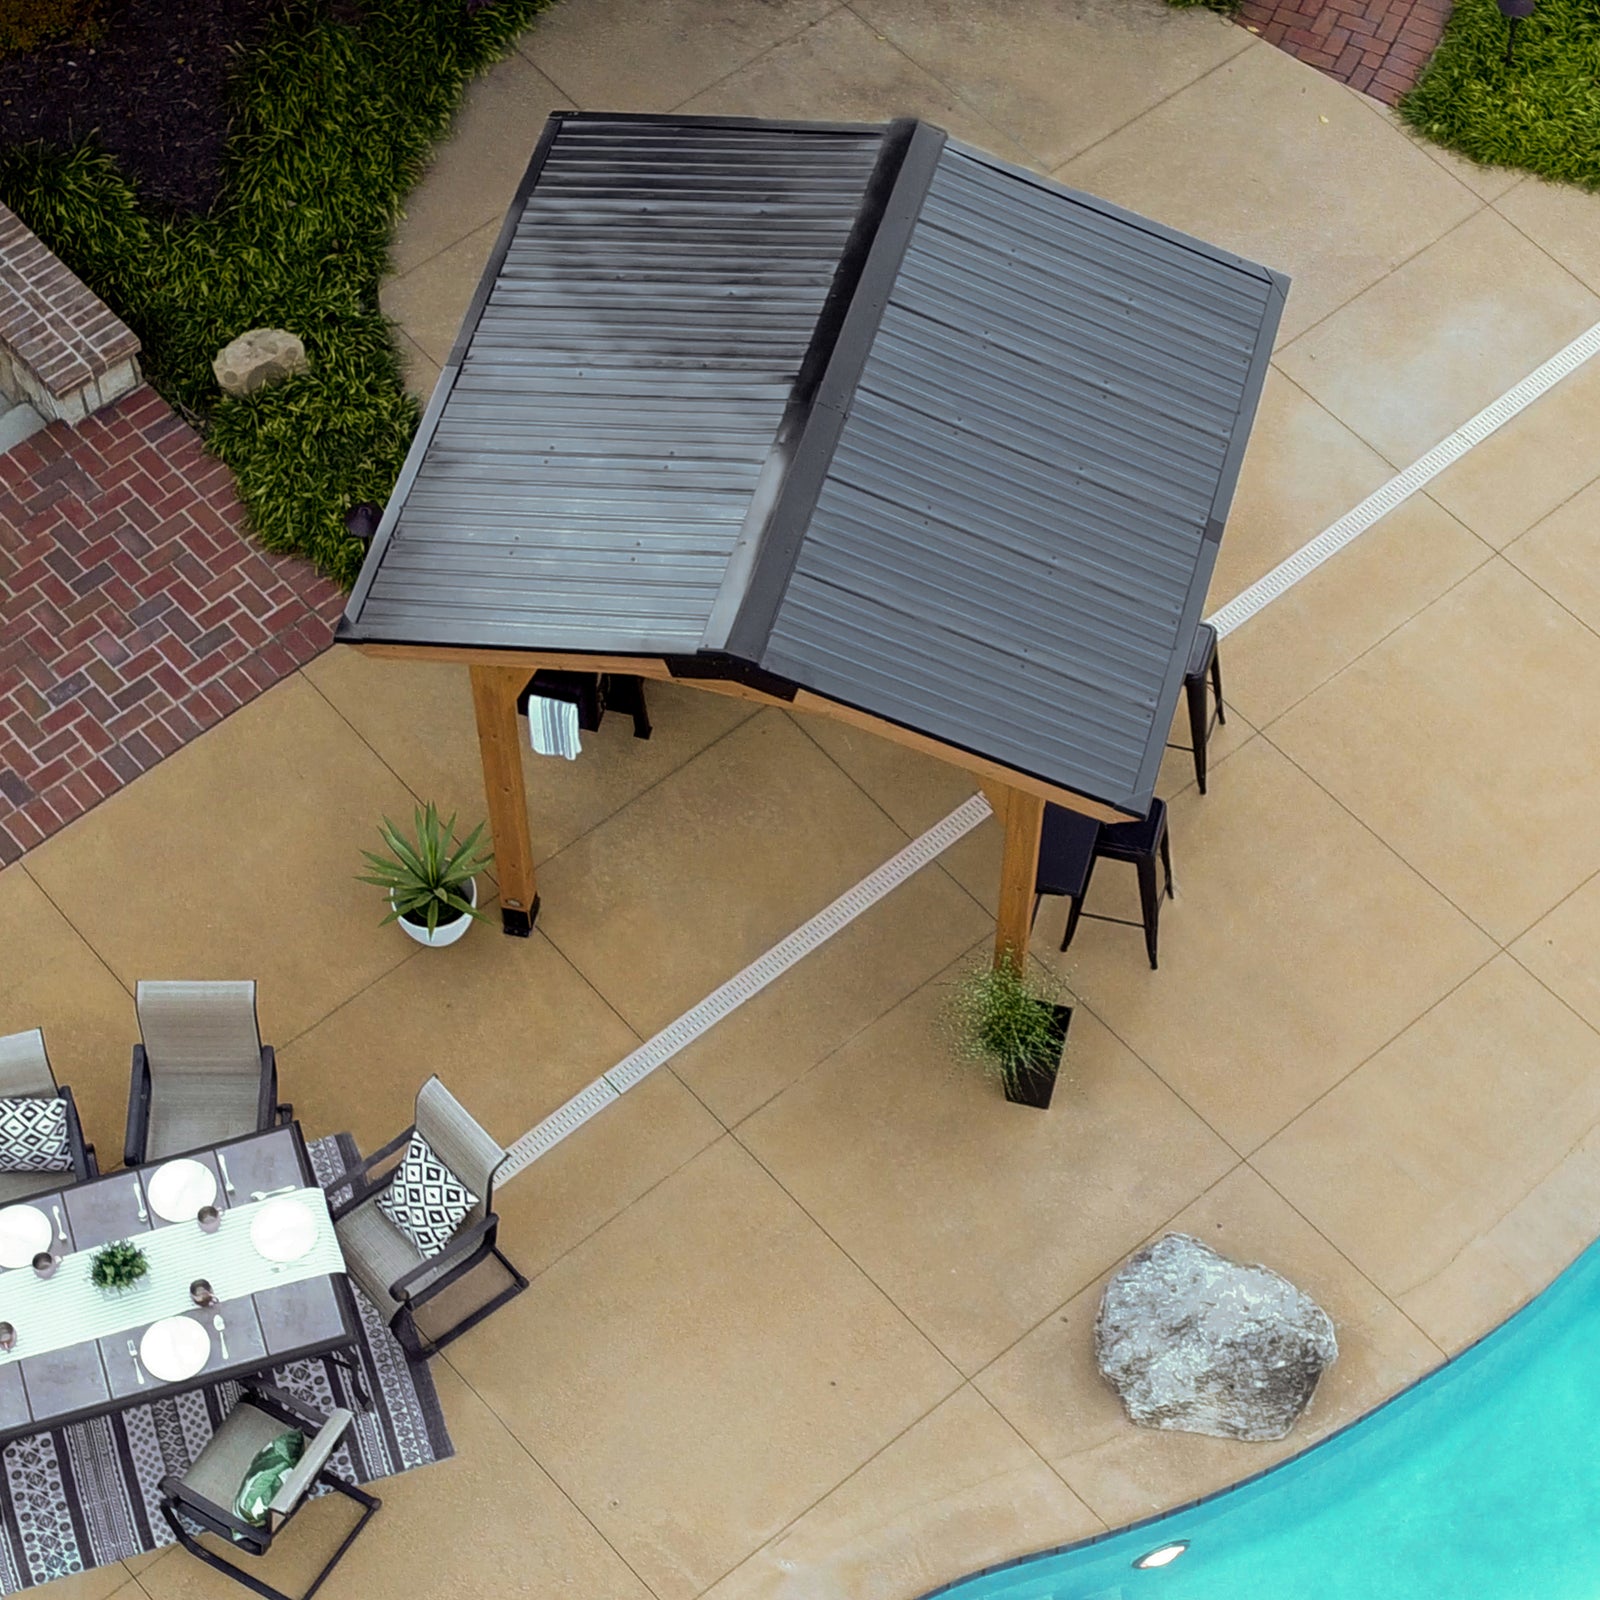 Load image into Gallery viewer, Granada Grill Gazebo with Outdoor Bar - Aerial view next to pool
